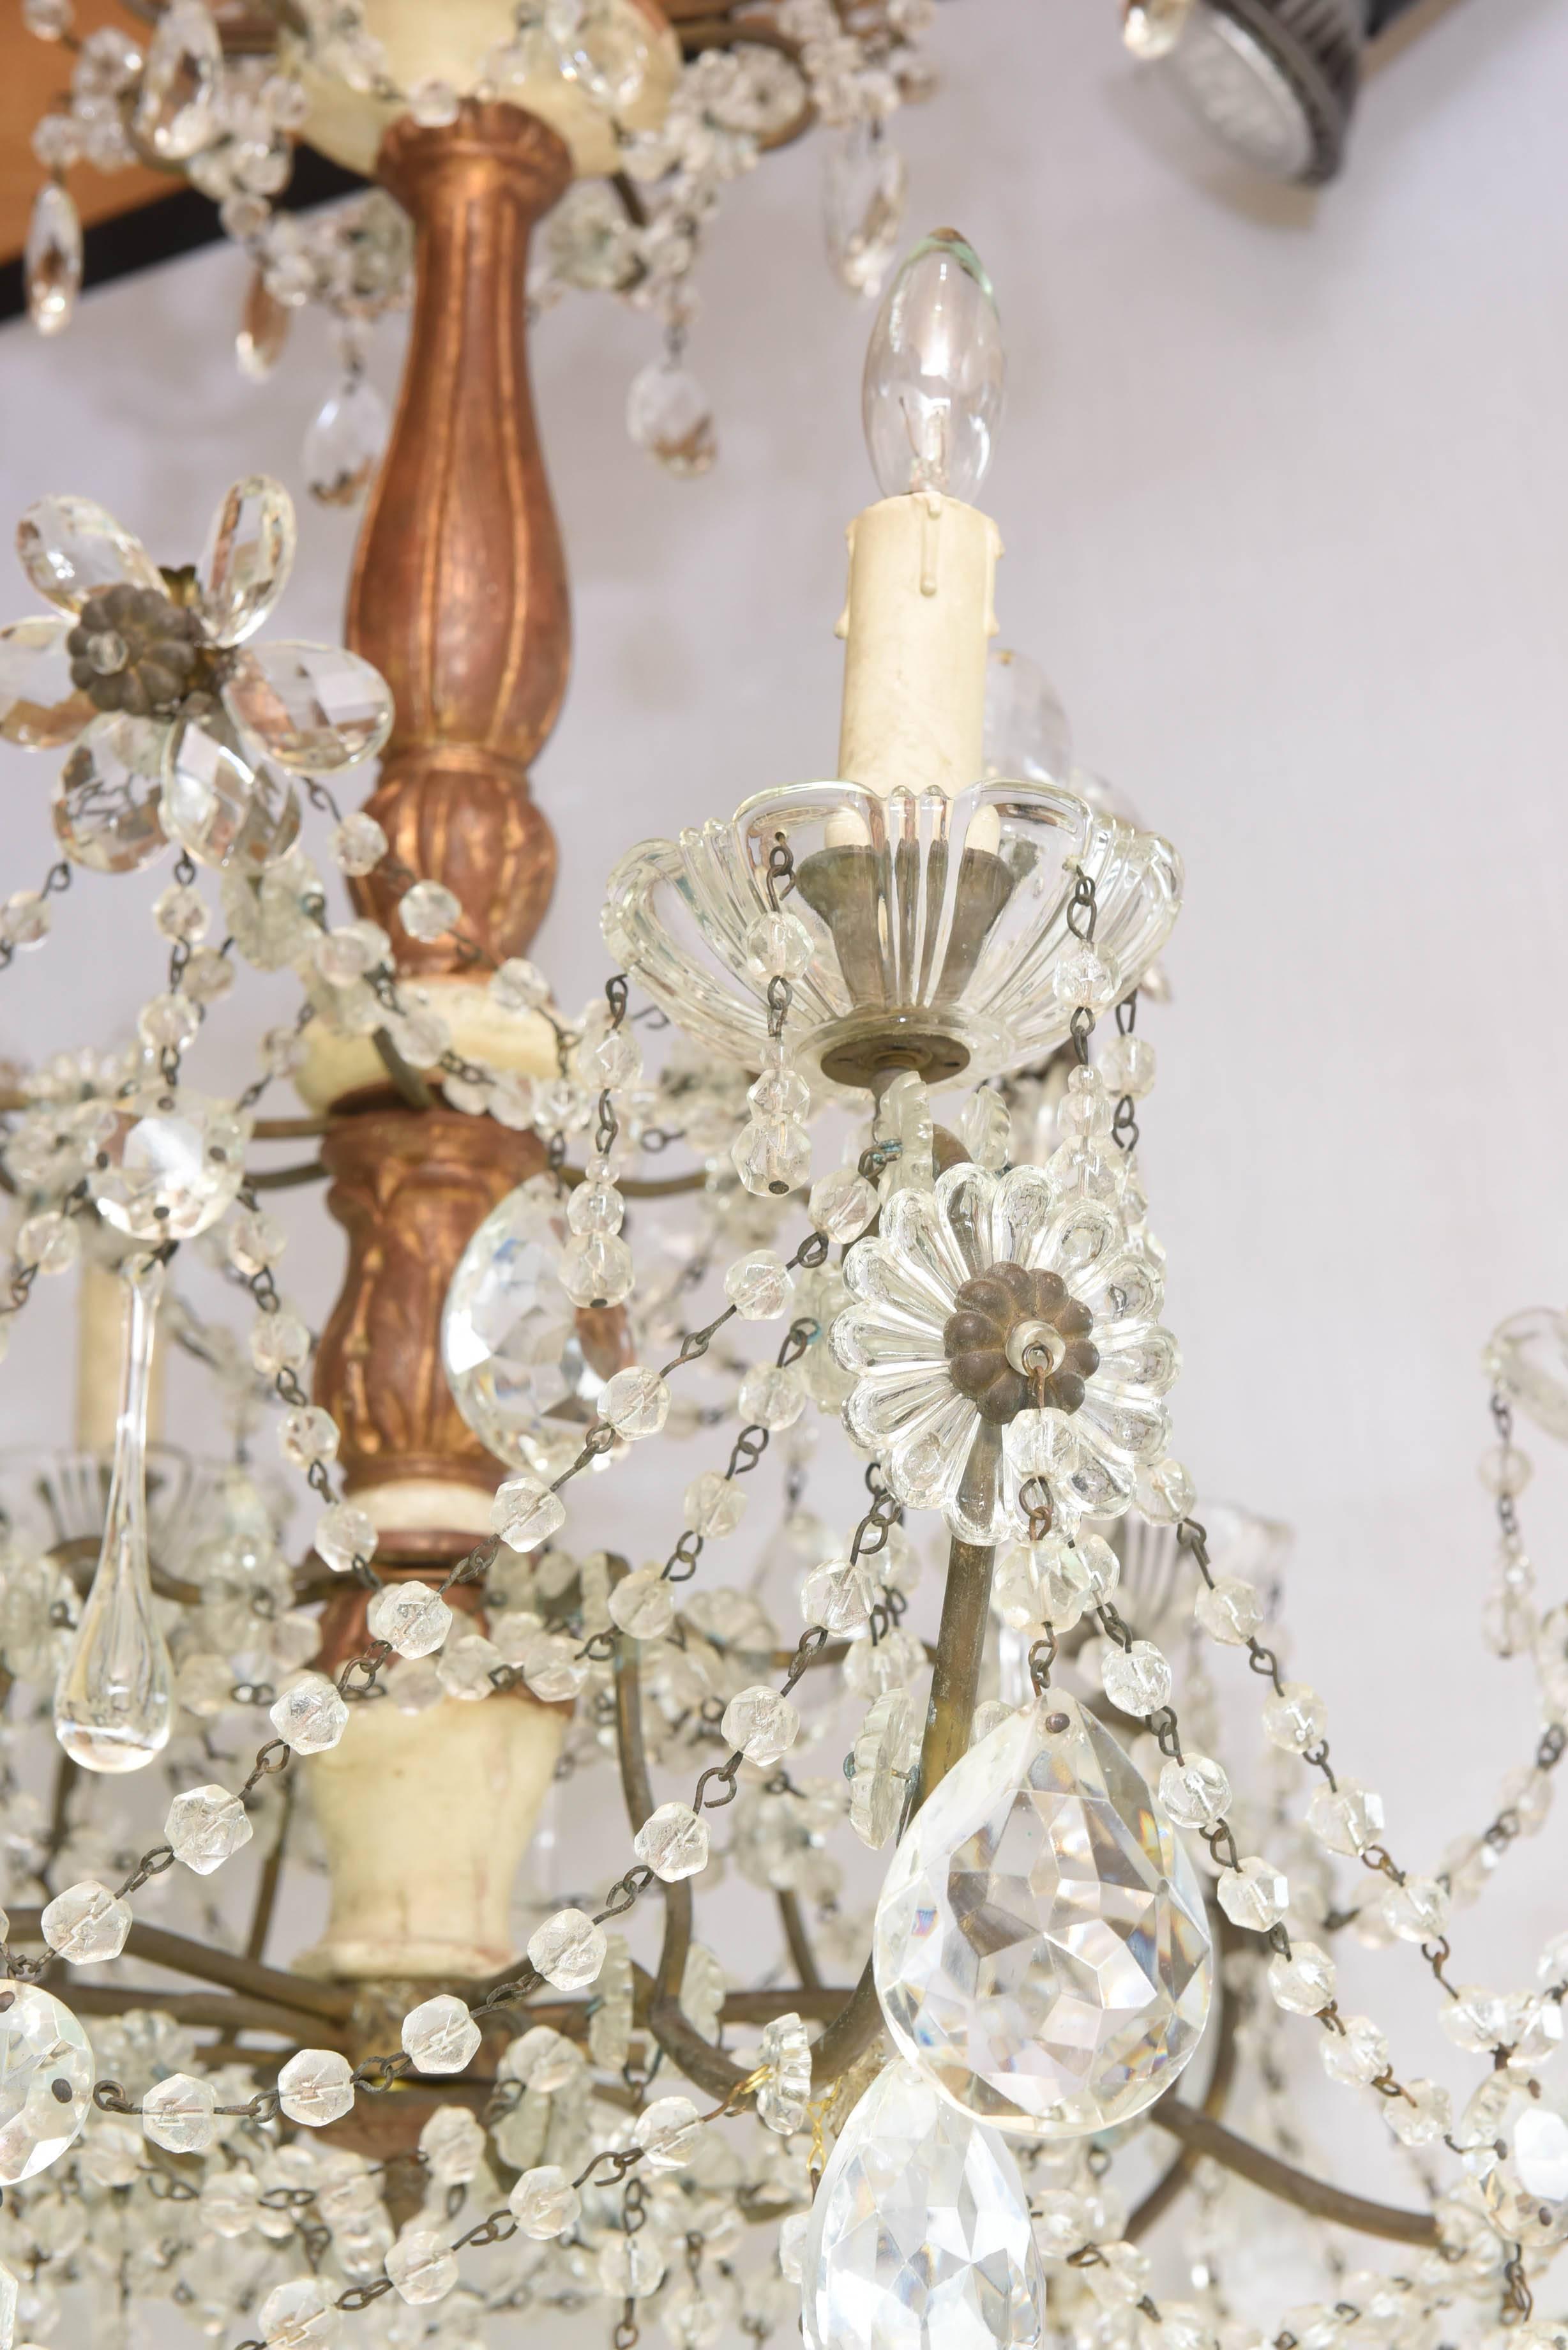 Chandelier, having a central column of an 18th century carved giltwood pricket stick, extruding four tiers of bronze arms, draped with strands of crystal beaded chains, six S-scroll candle arms ending in scalloped bobeches, and electrified candles,